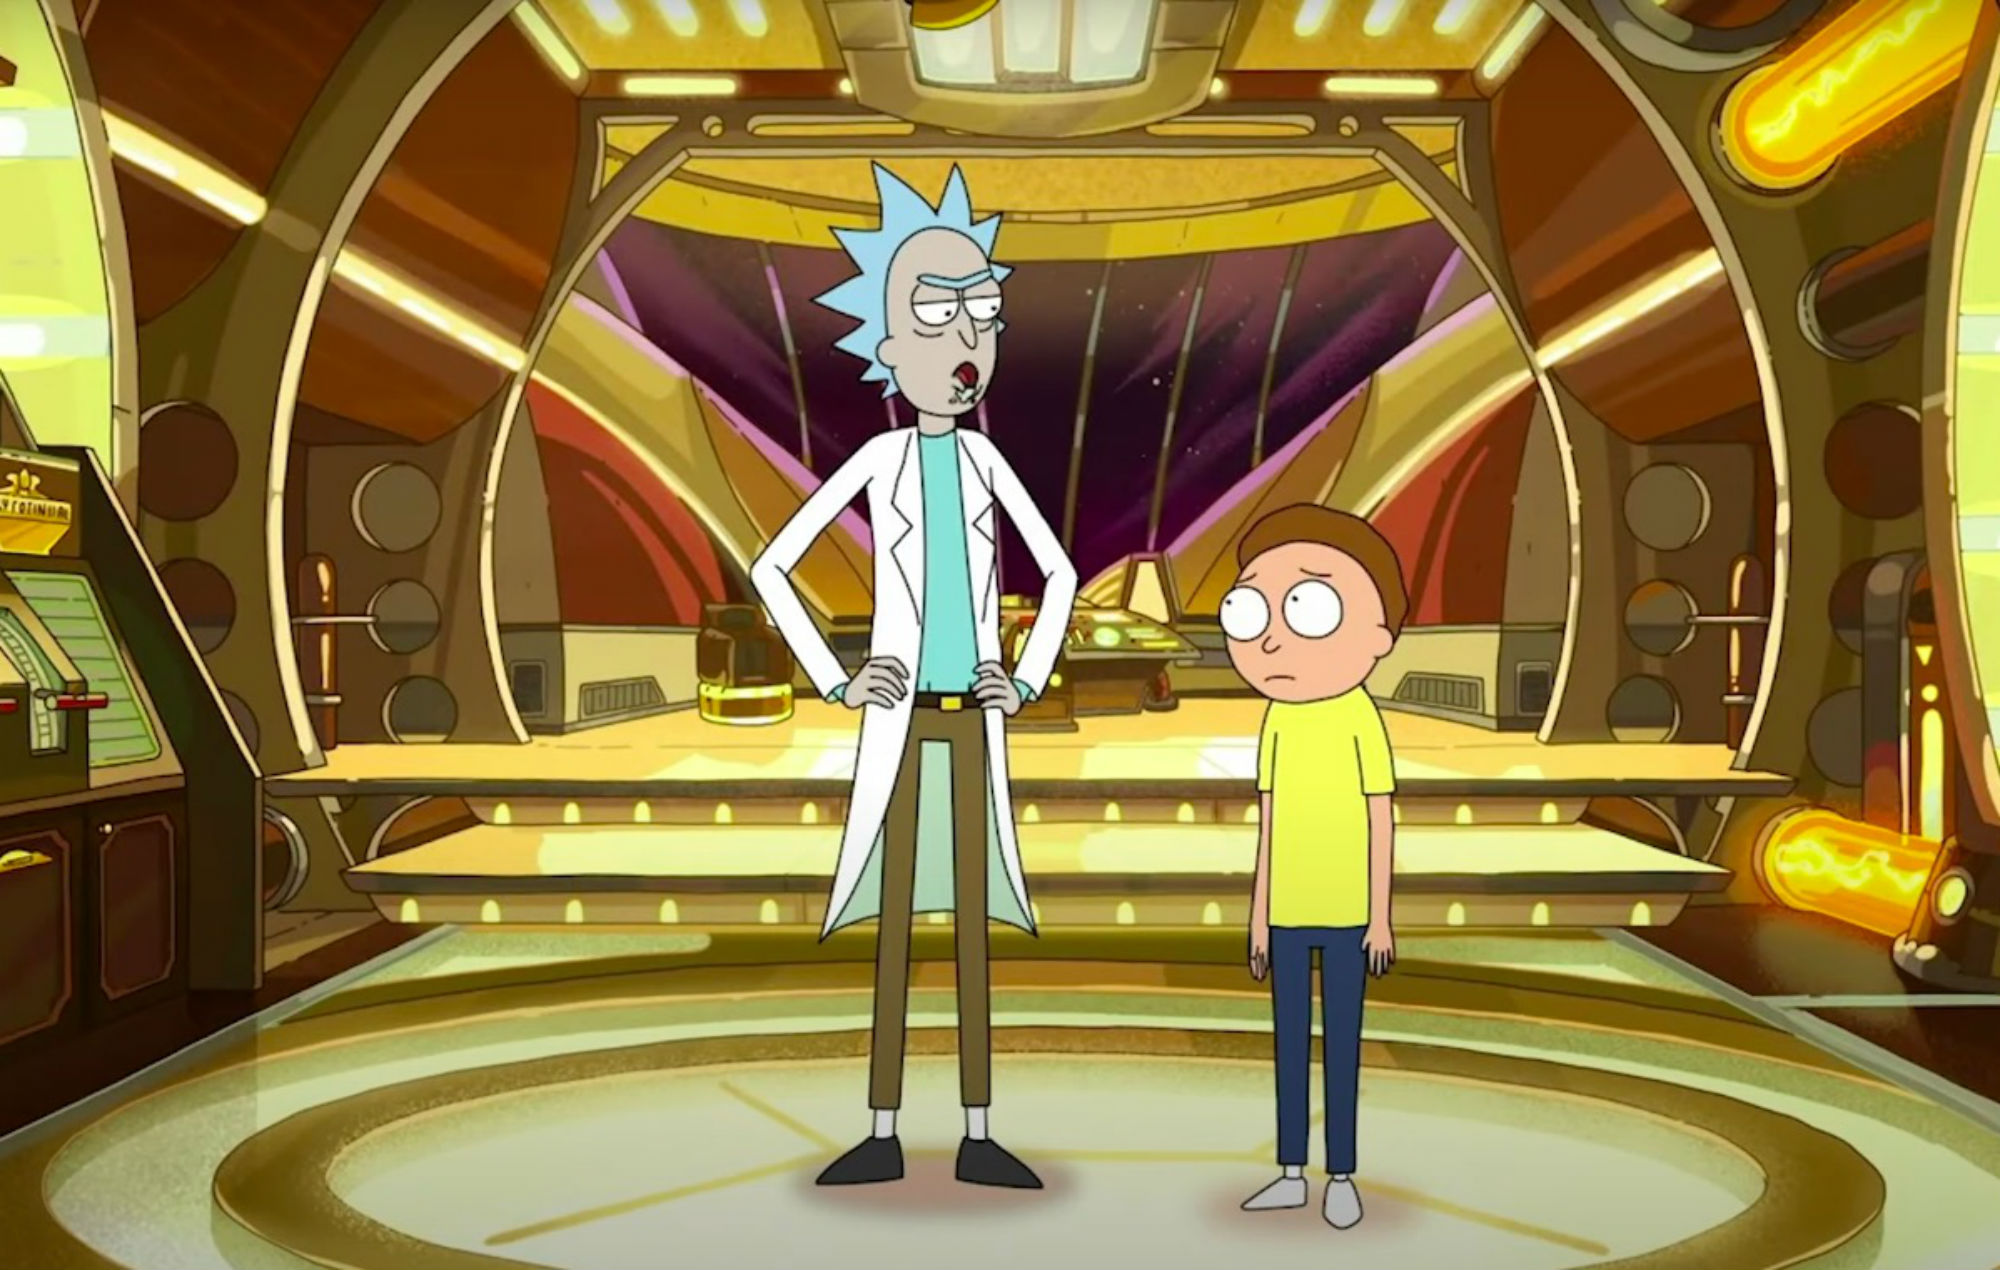 'Rick and Morty' season 5 gets a first look in new teaser clip